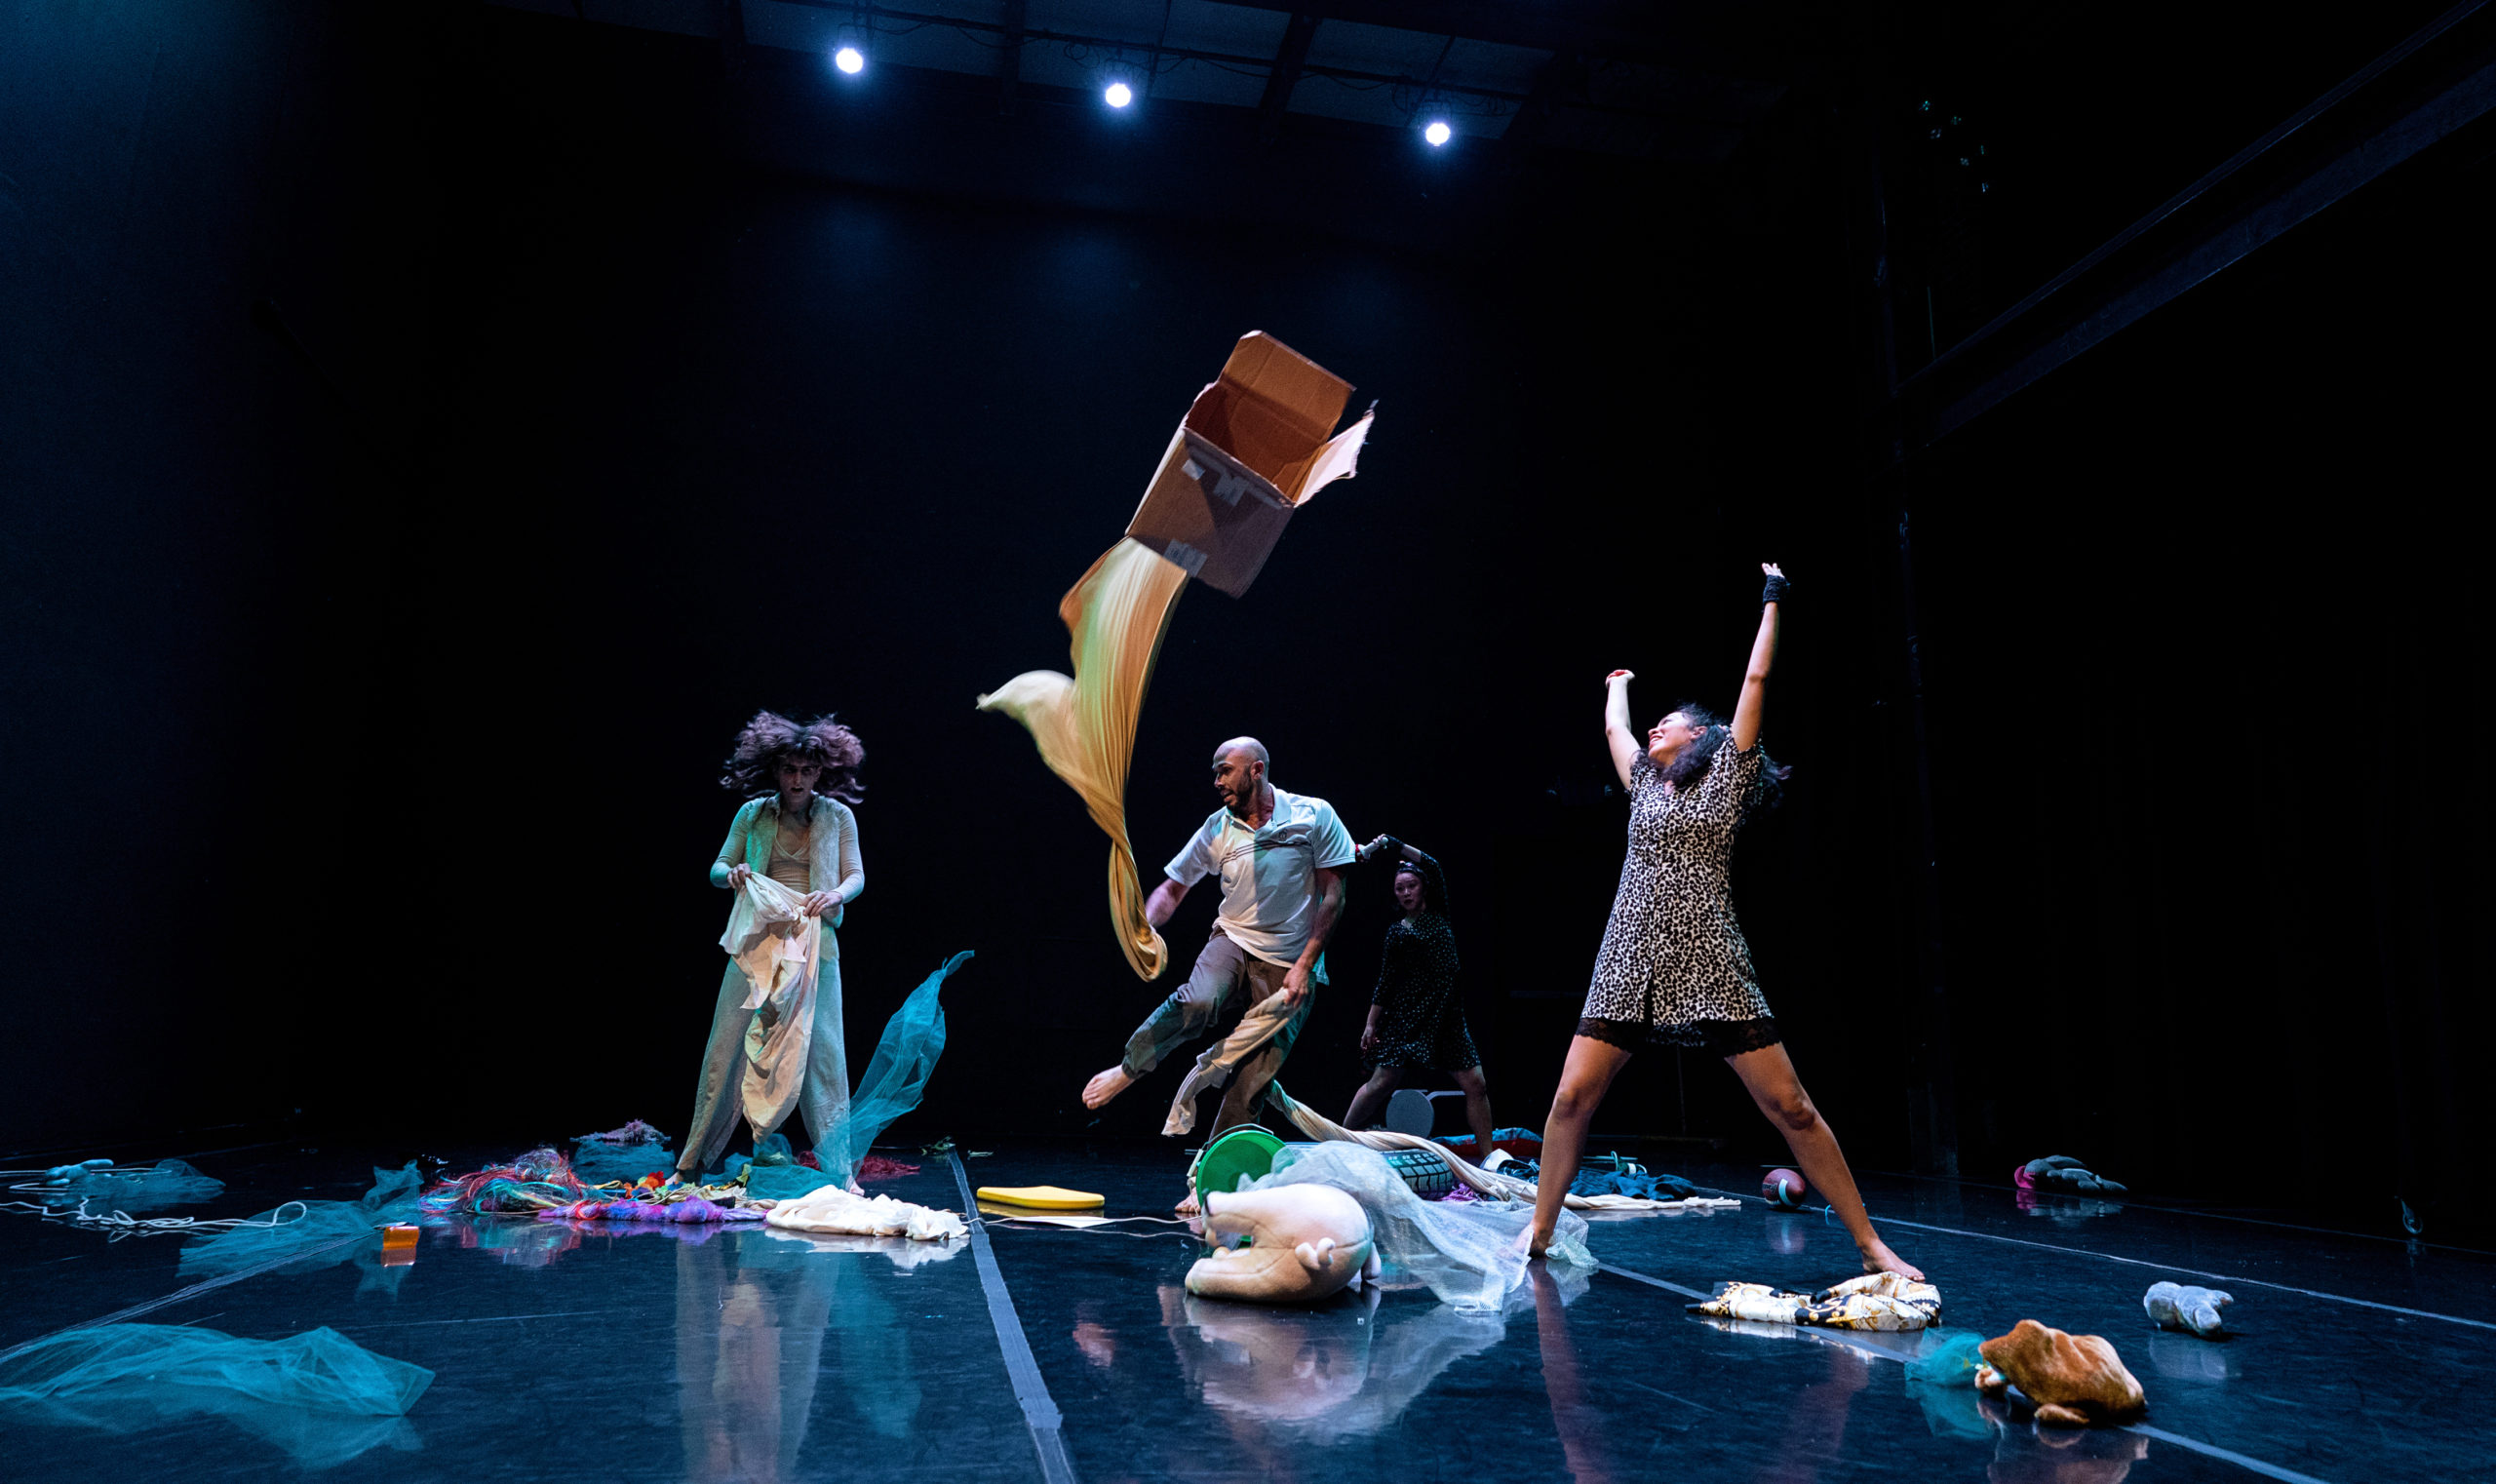 Four dancers variously run and stand on a stage littered with fallen boxes, stuffed animals and articles of clothing. A cardboard box flies high overhead.